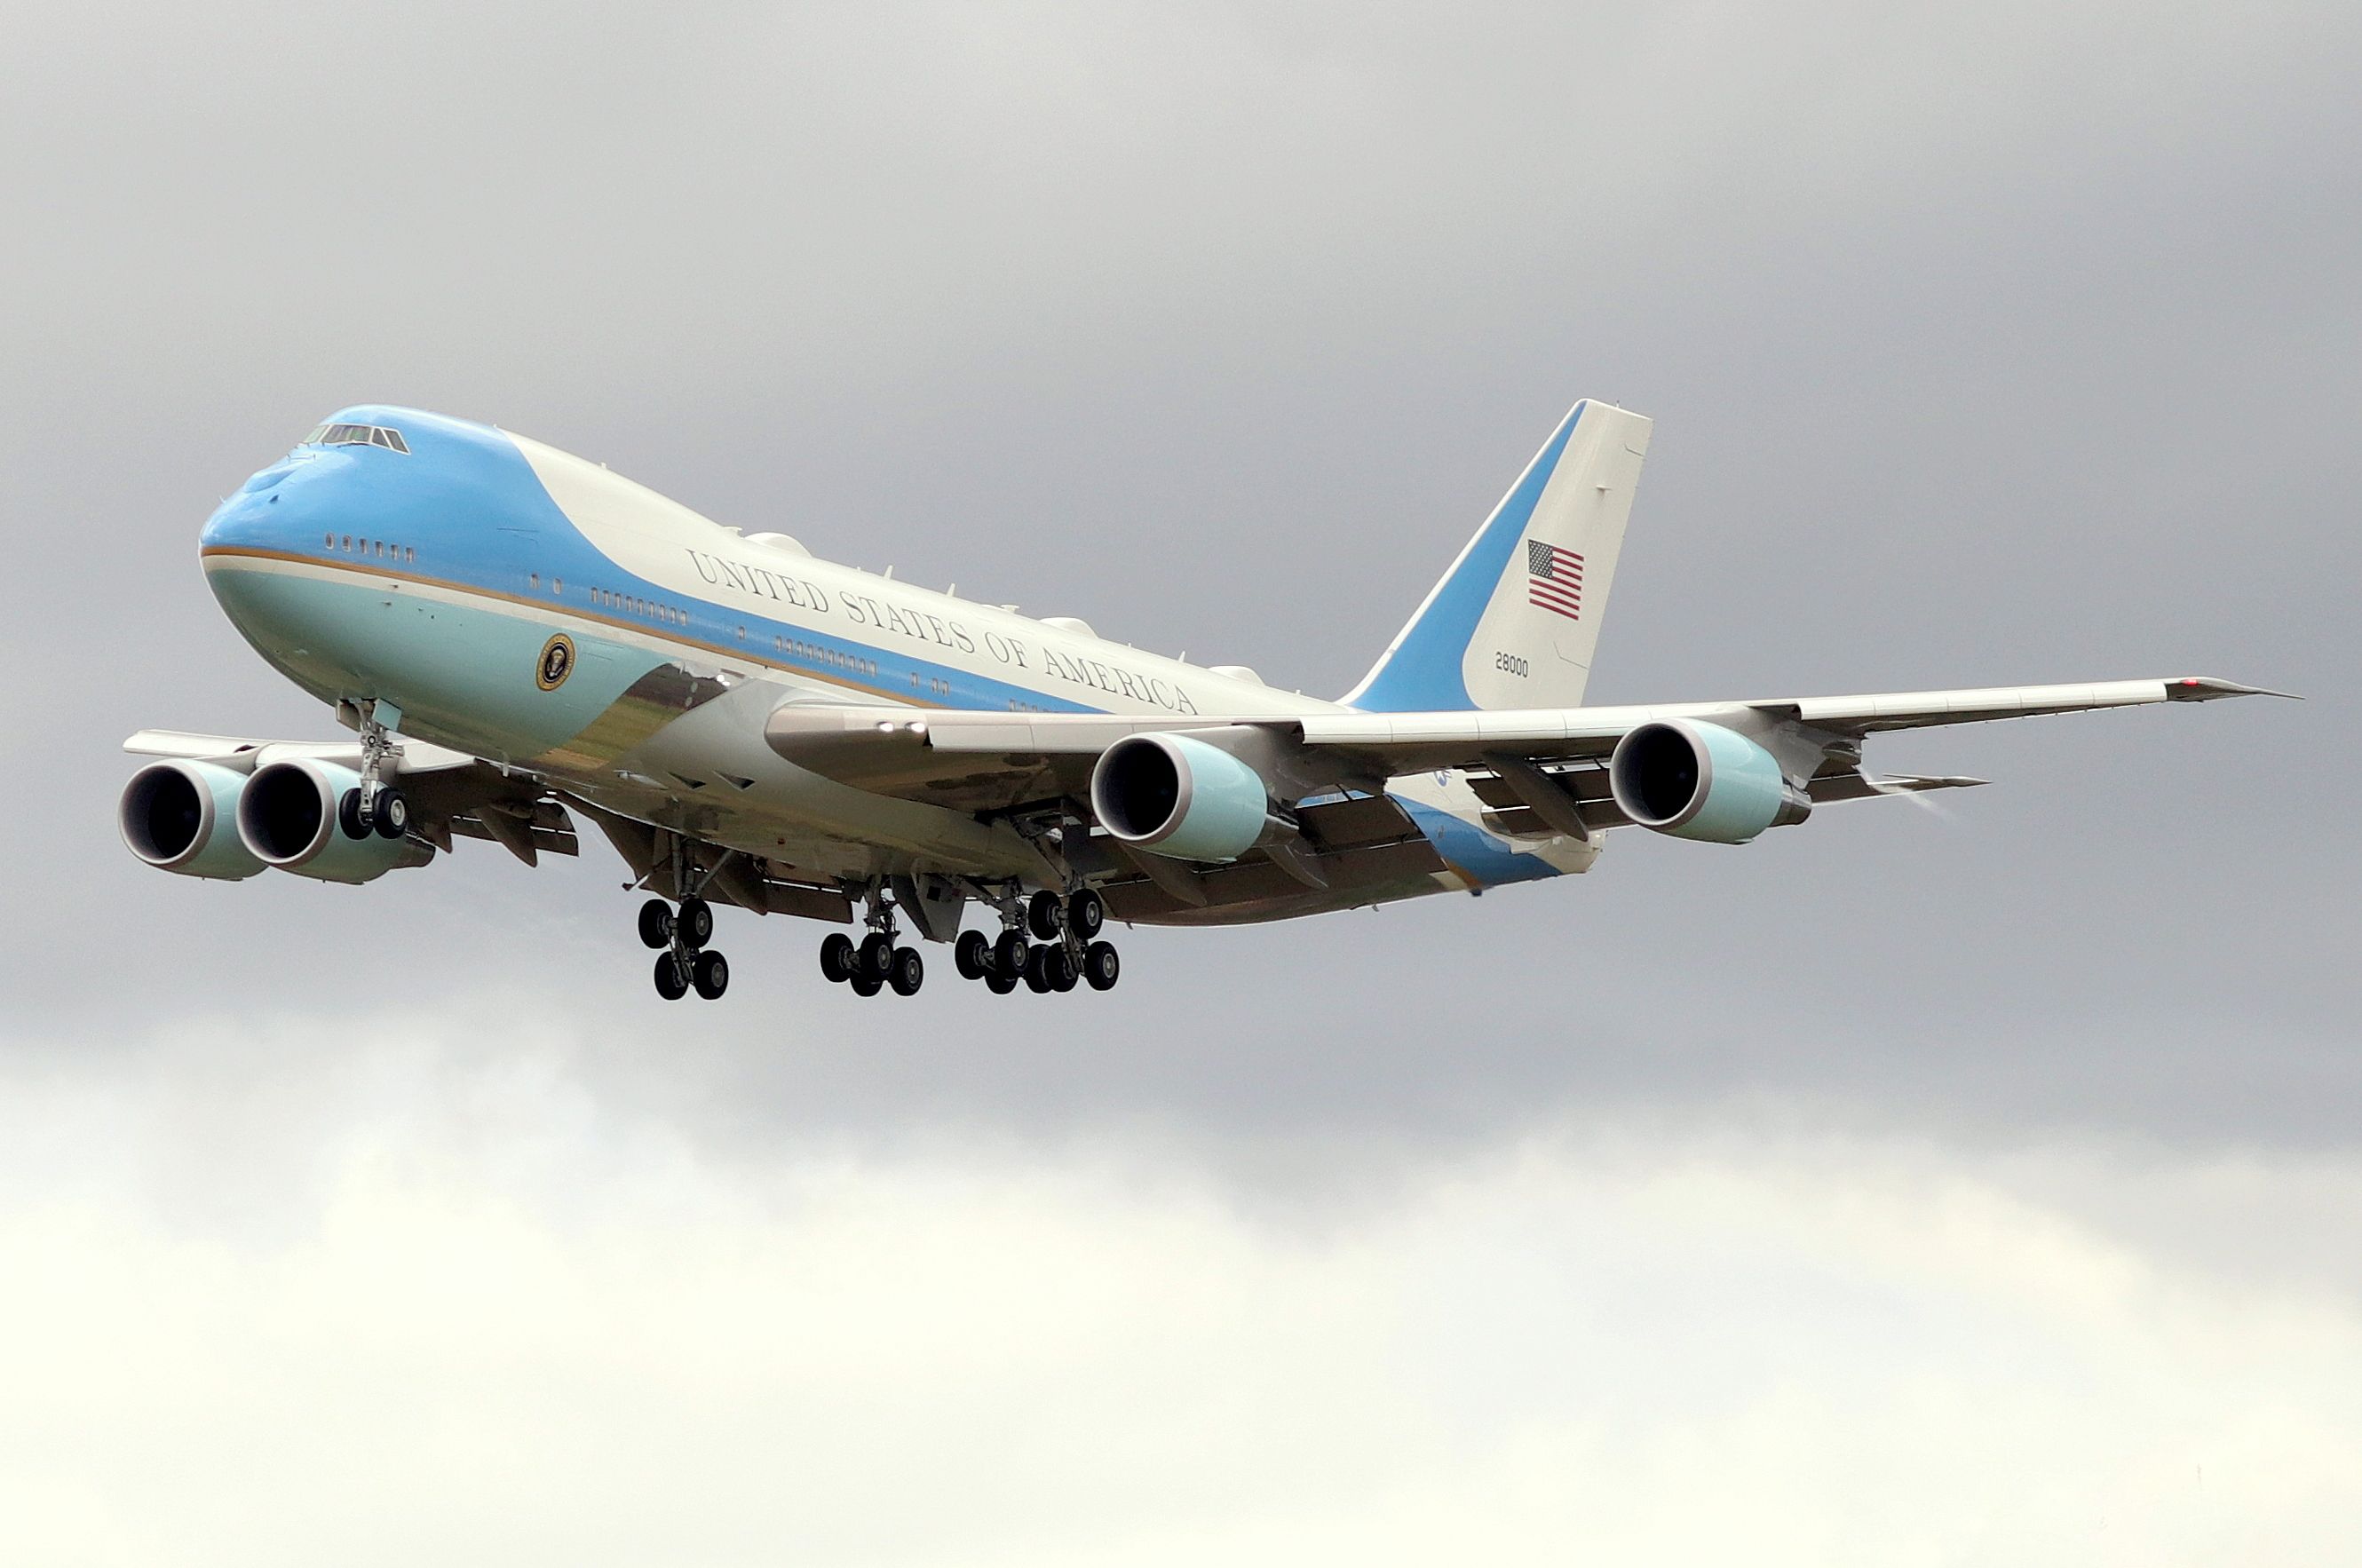 Boeing 747-200 (82-8000) - 'Air Force One' arriving at Pease bringing President Biden to Portsmouth, NH     (4/19)